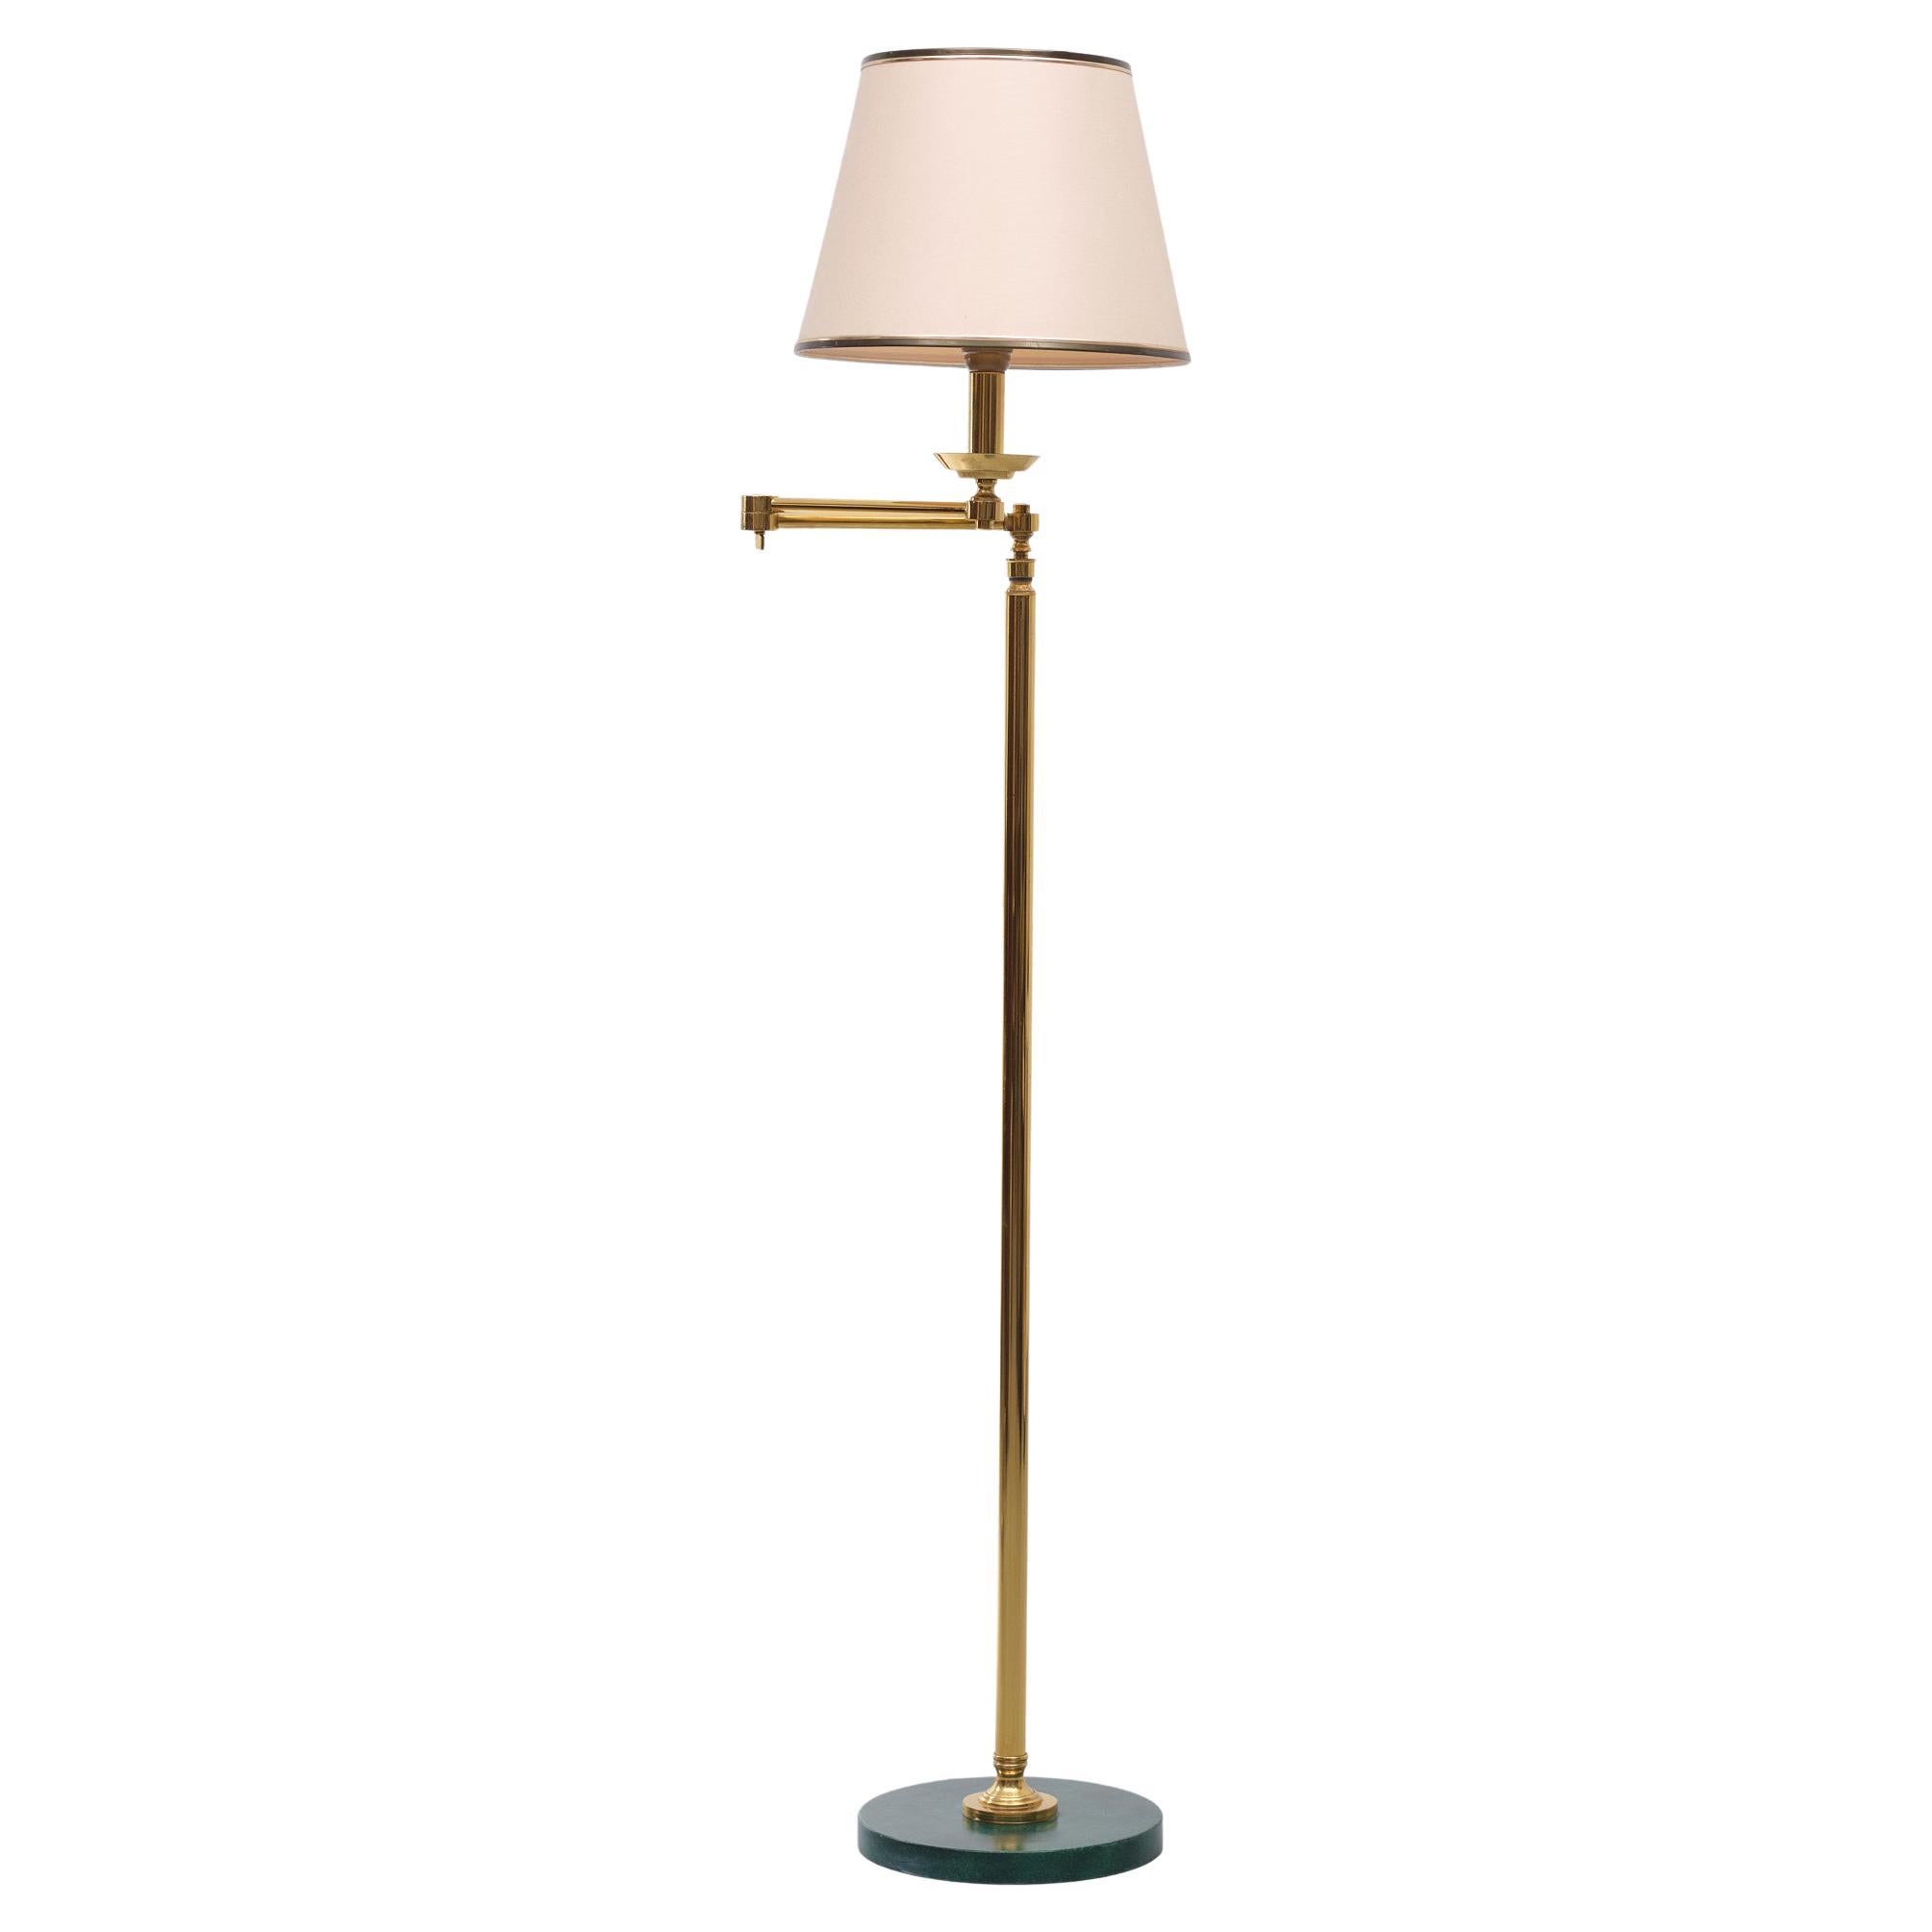 Very nice brass floor lamp. Articulated arm, adjustable in height. 1970s Original Green
base. One large E27 bulb. Good condition.